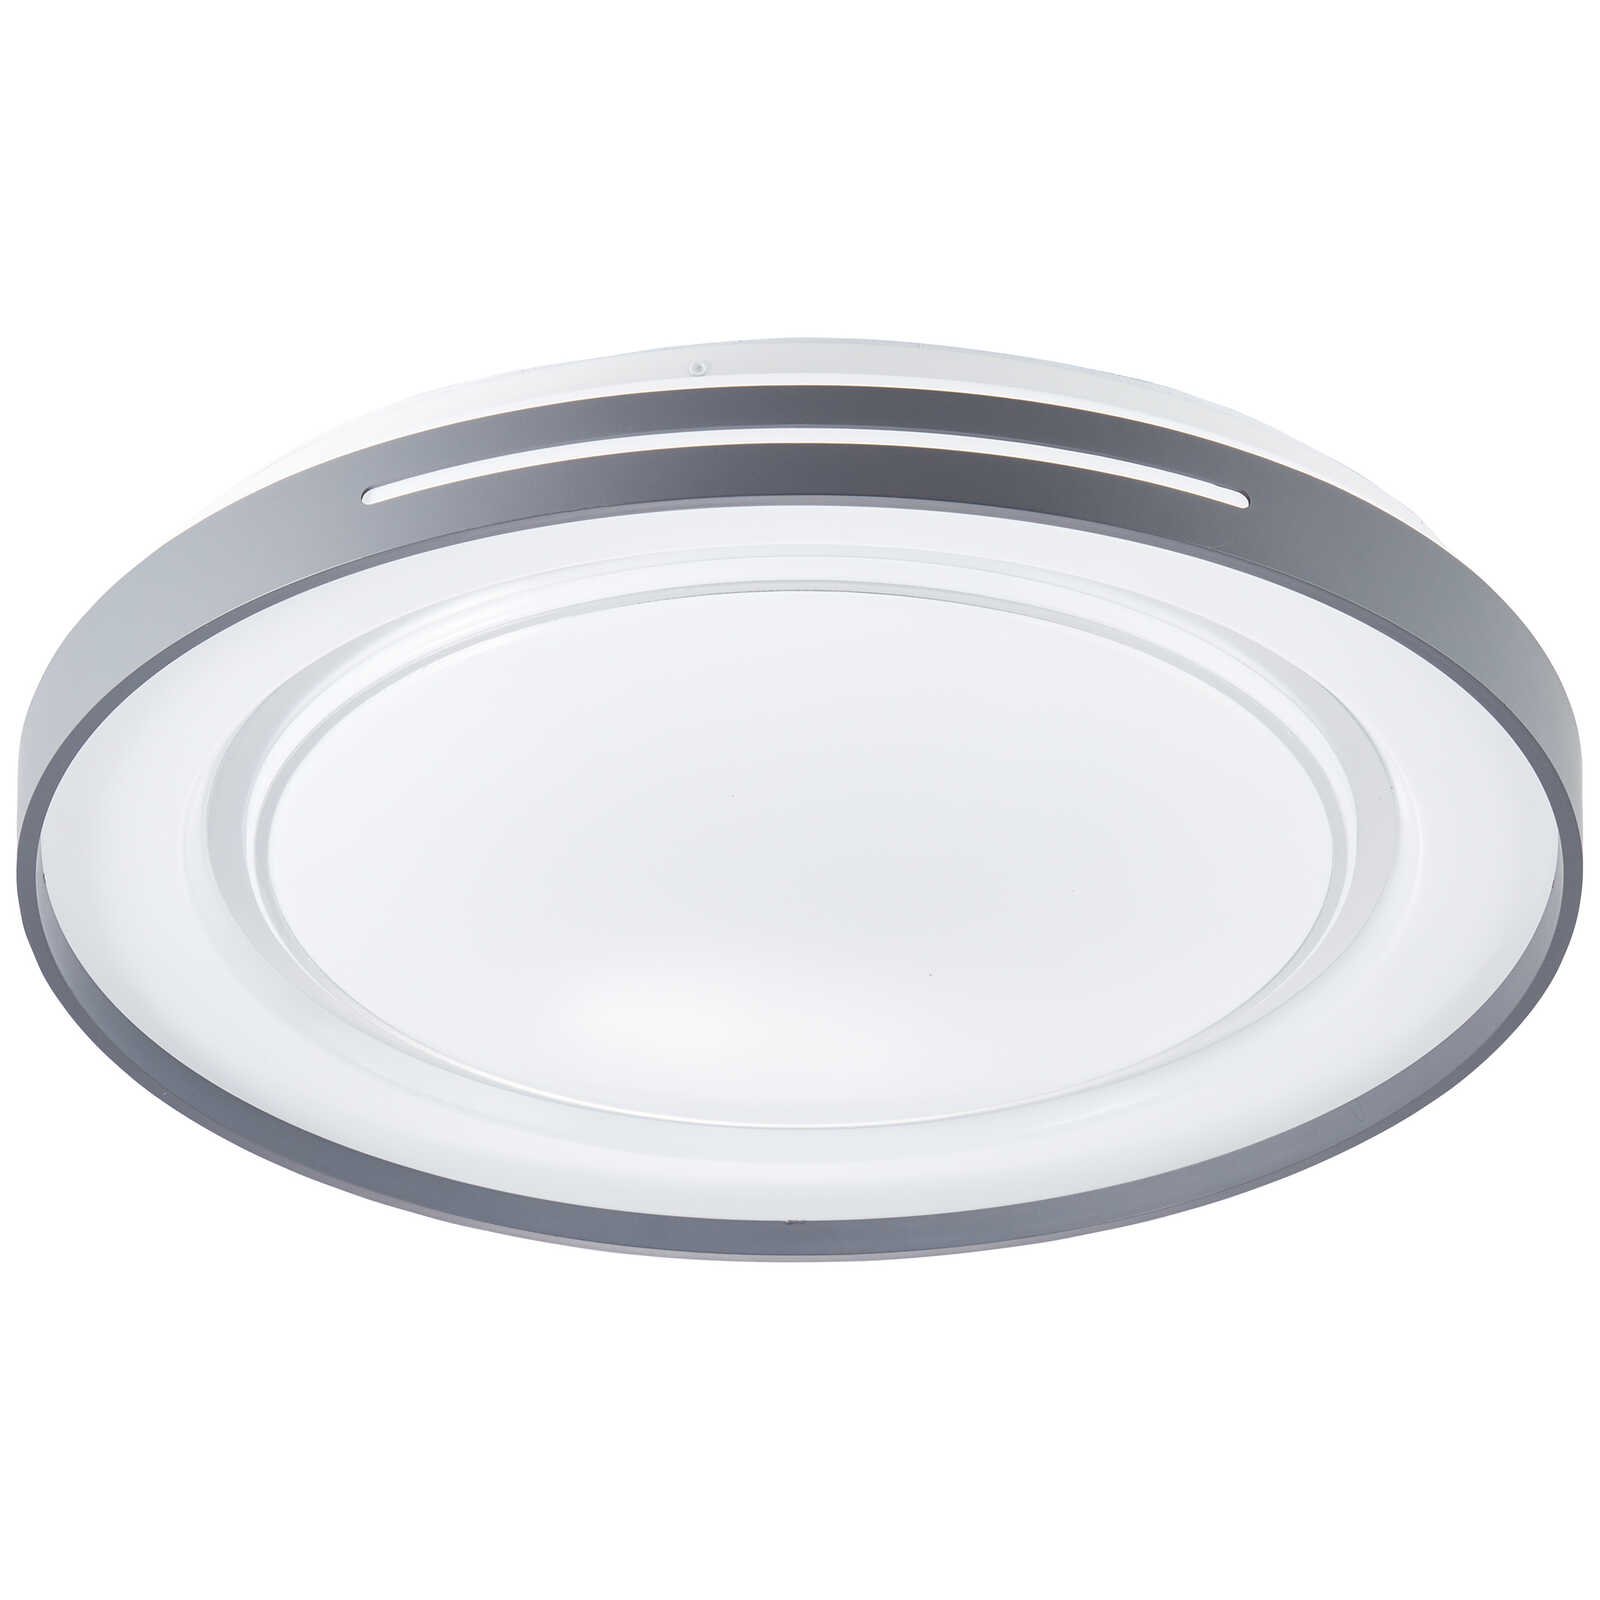             Plastic wall and ceiling light - Aurora 1 - Grey
        